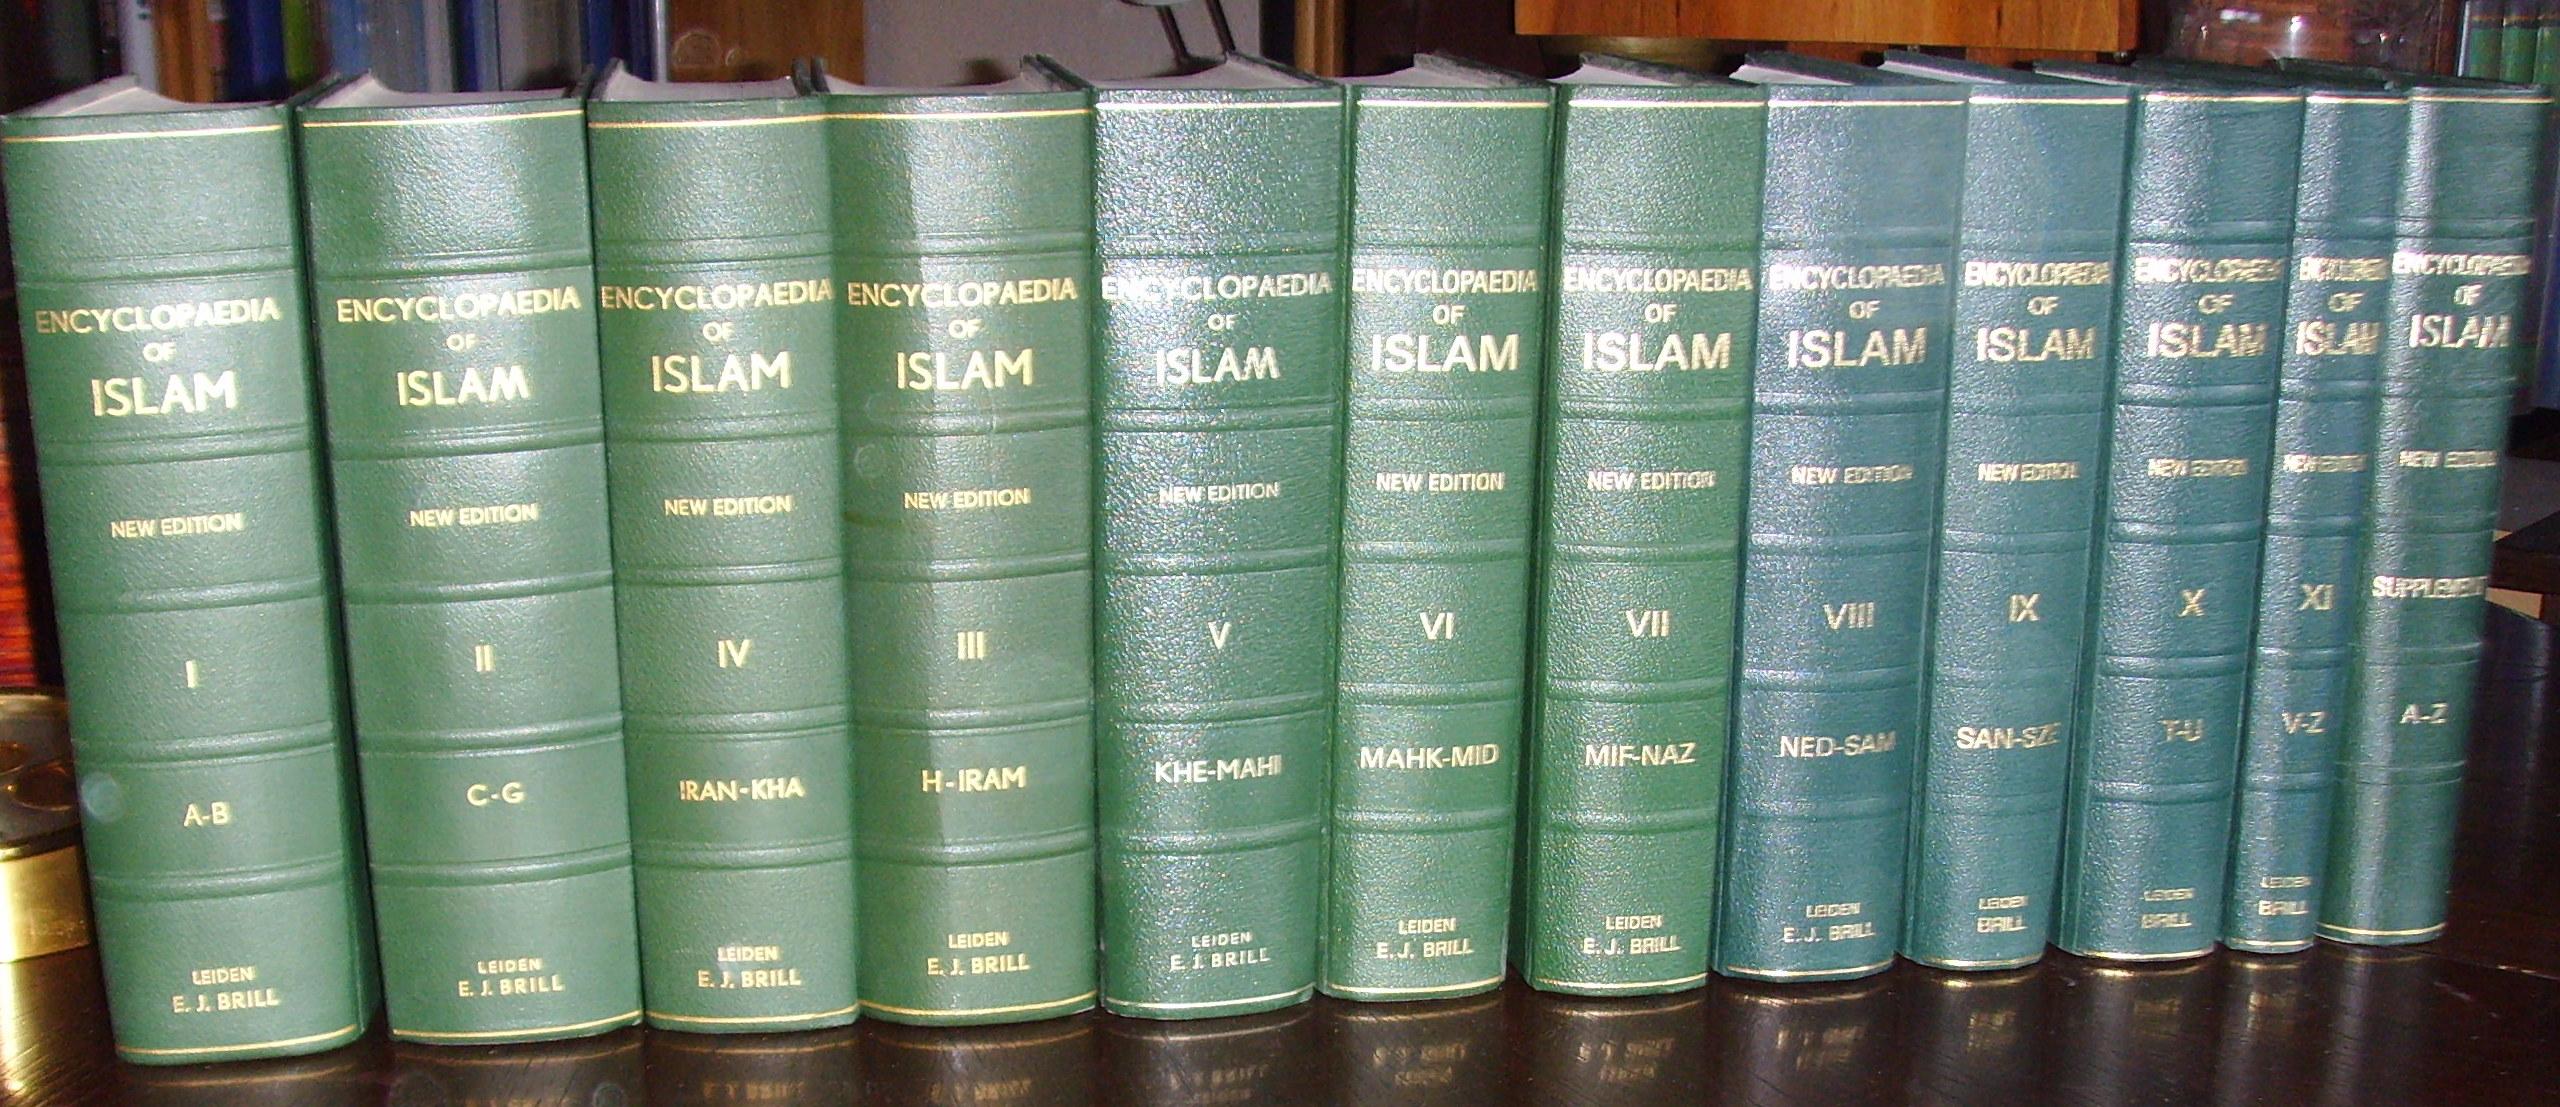 The Encyclopaedia of Islam. New Edition. Prepared by a number of leading Orientalists. 12 Vol. Vol. XII: Supplement A-Z. - Gibb, H. A. R. / Kramers, J. H. / Lévi-Provencal, E. / Schacht, J. u.a.